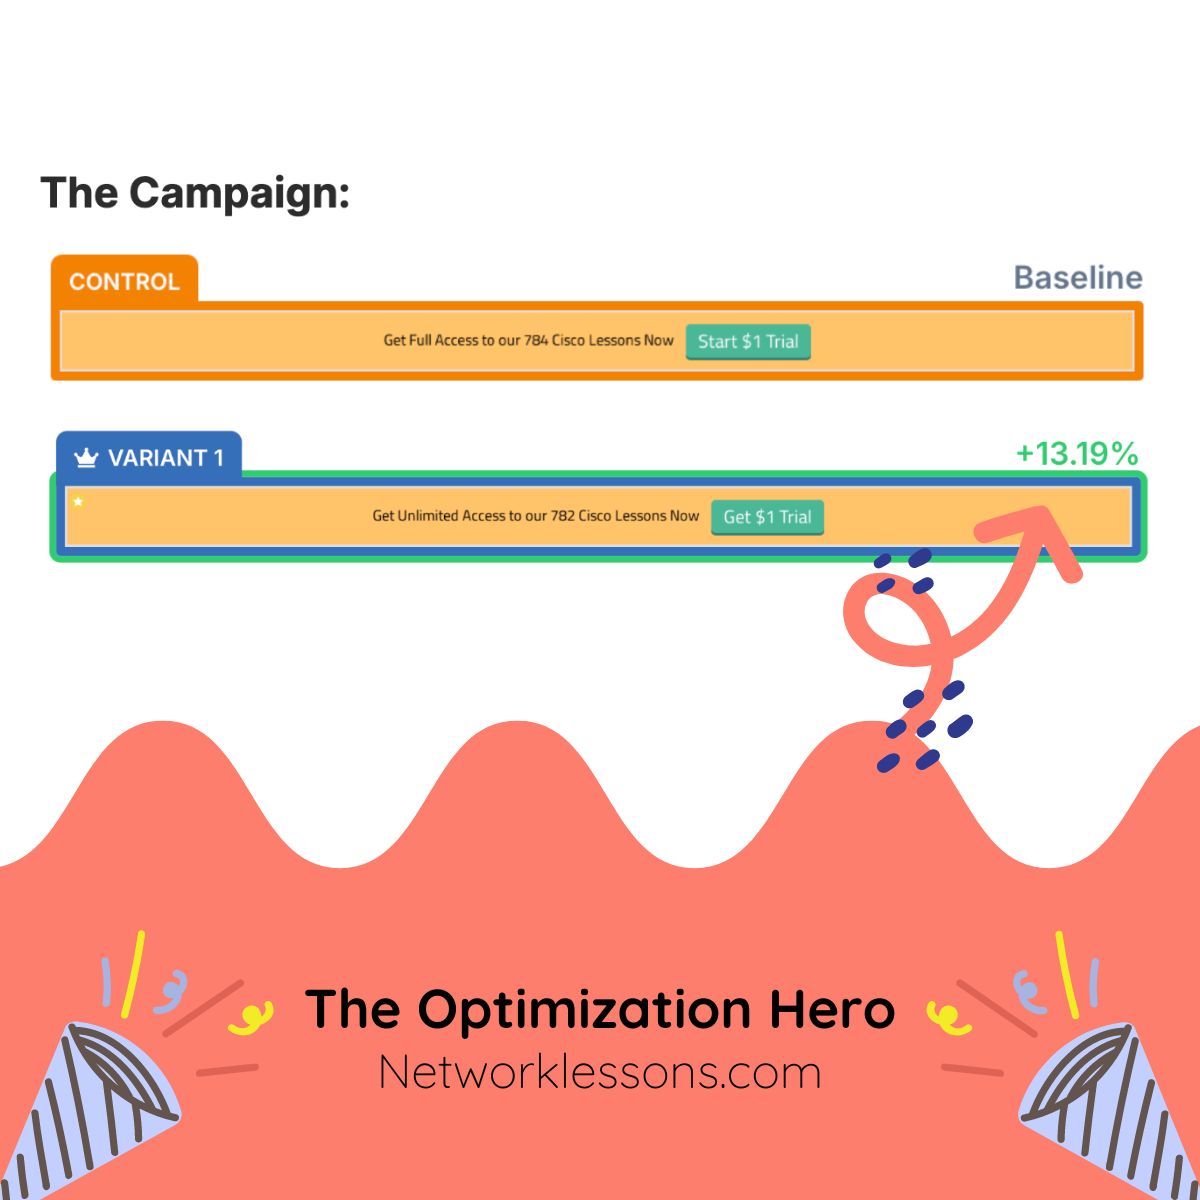 🏆 Shoutout to @NetworkLessons, our Optimization Hero of the Month! 🎉

Their dedication to making networking courses like CCNA, CCNP, and CCIE easier to learn is truly inspiring.

Check out their A/B test success story 👇

#abtesting #growthmarketing #conversionrateoptimization